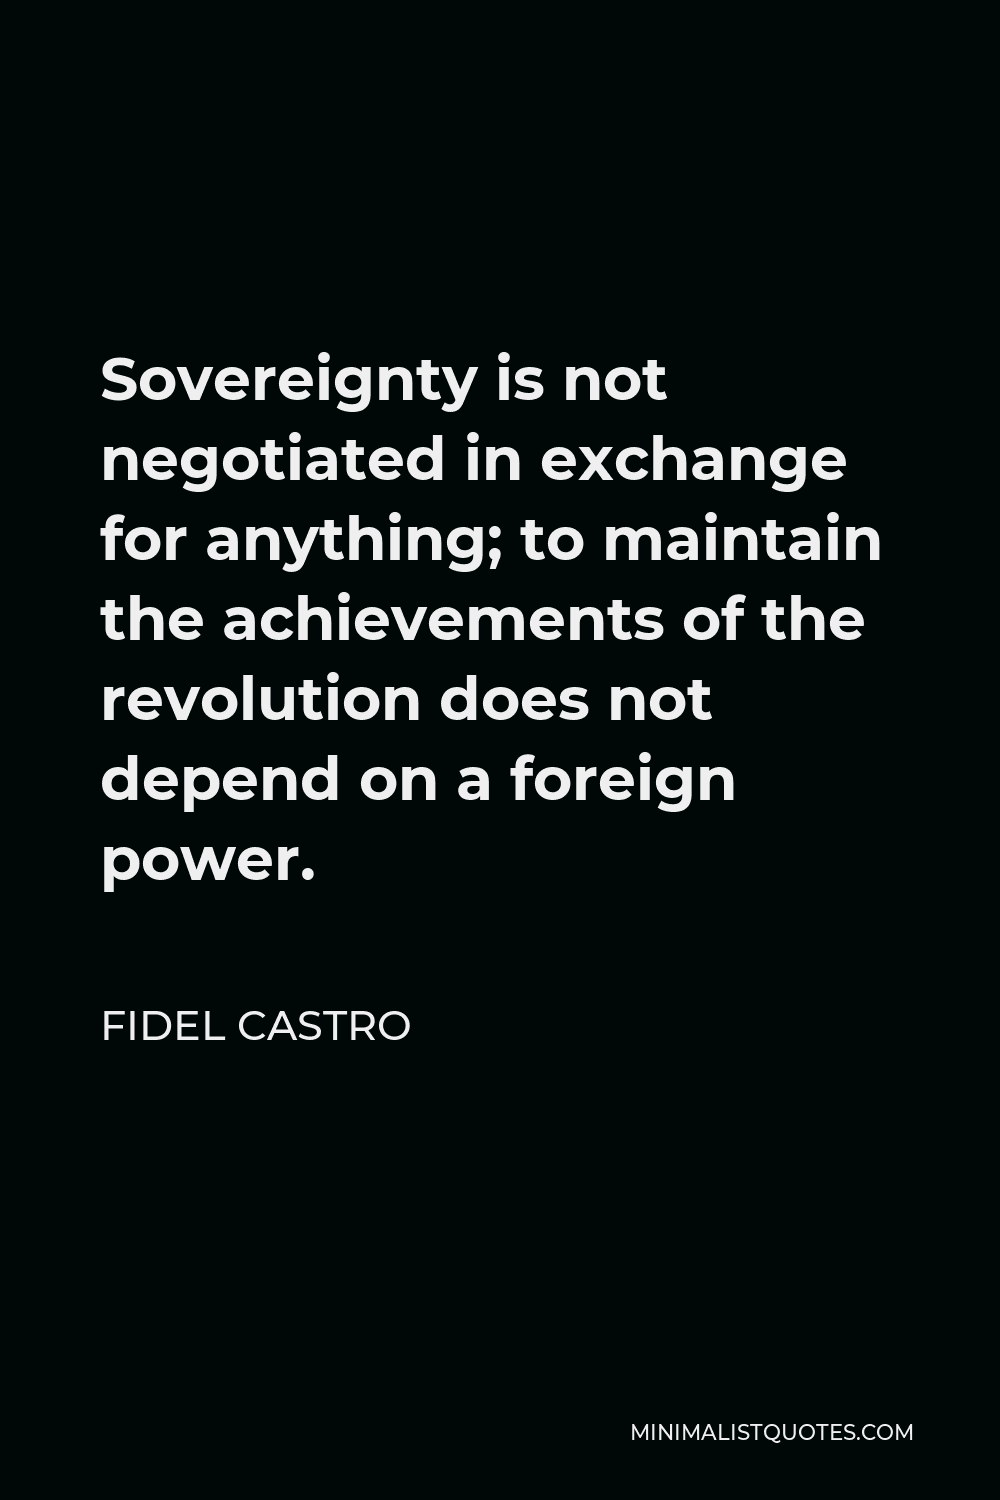 Fidel Castro Quote - Sovereignty is not negotiated in exchange for anything; to maintain the achievements of the revolution does not depend on a foreign power.